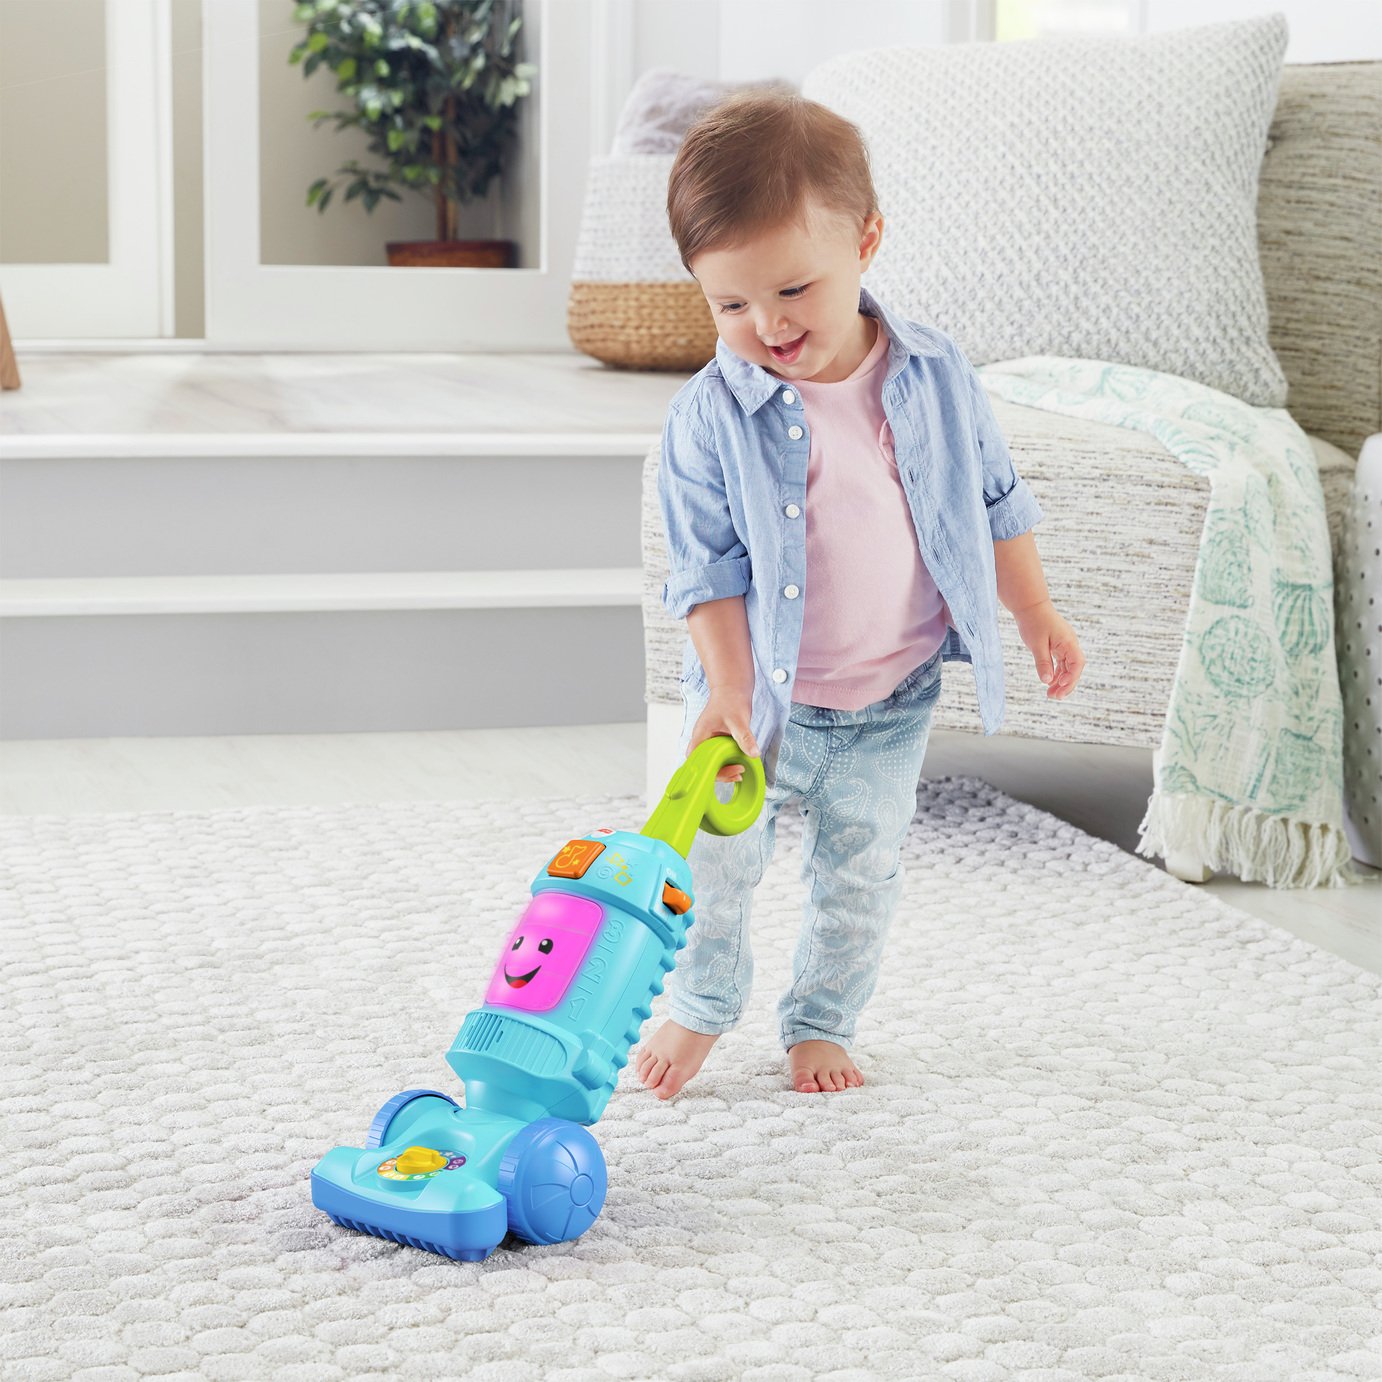 Fisher-Price Laugh & Learn Light-up Learning Vacuum review